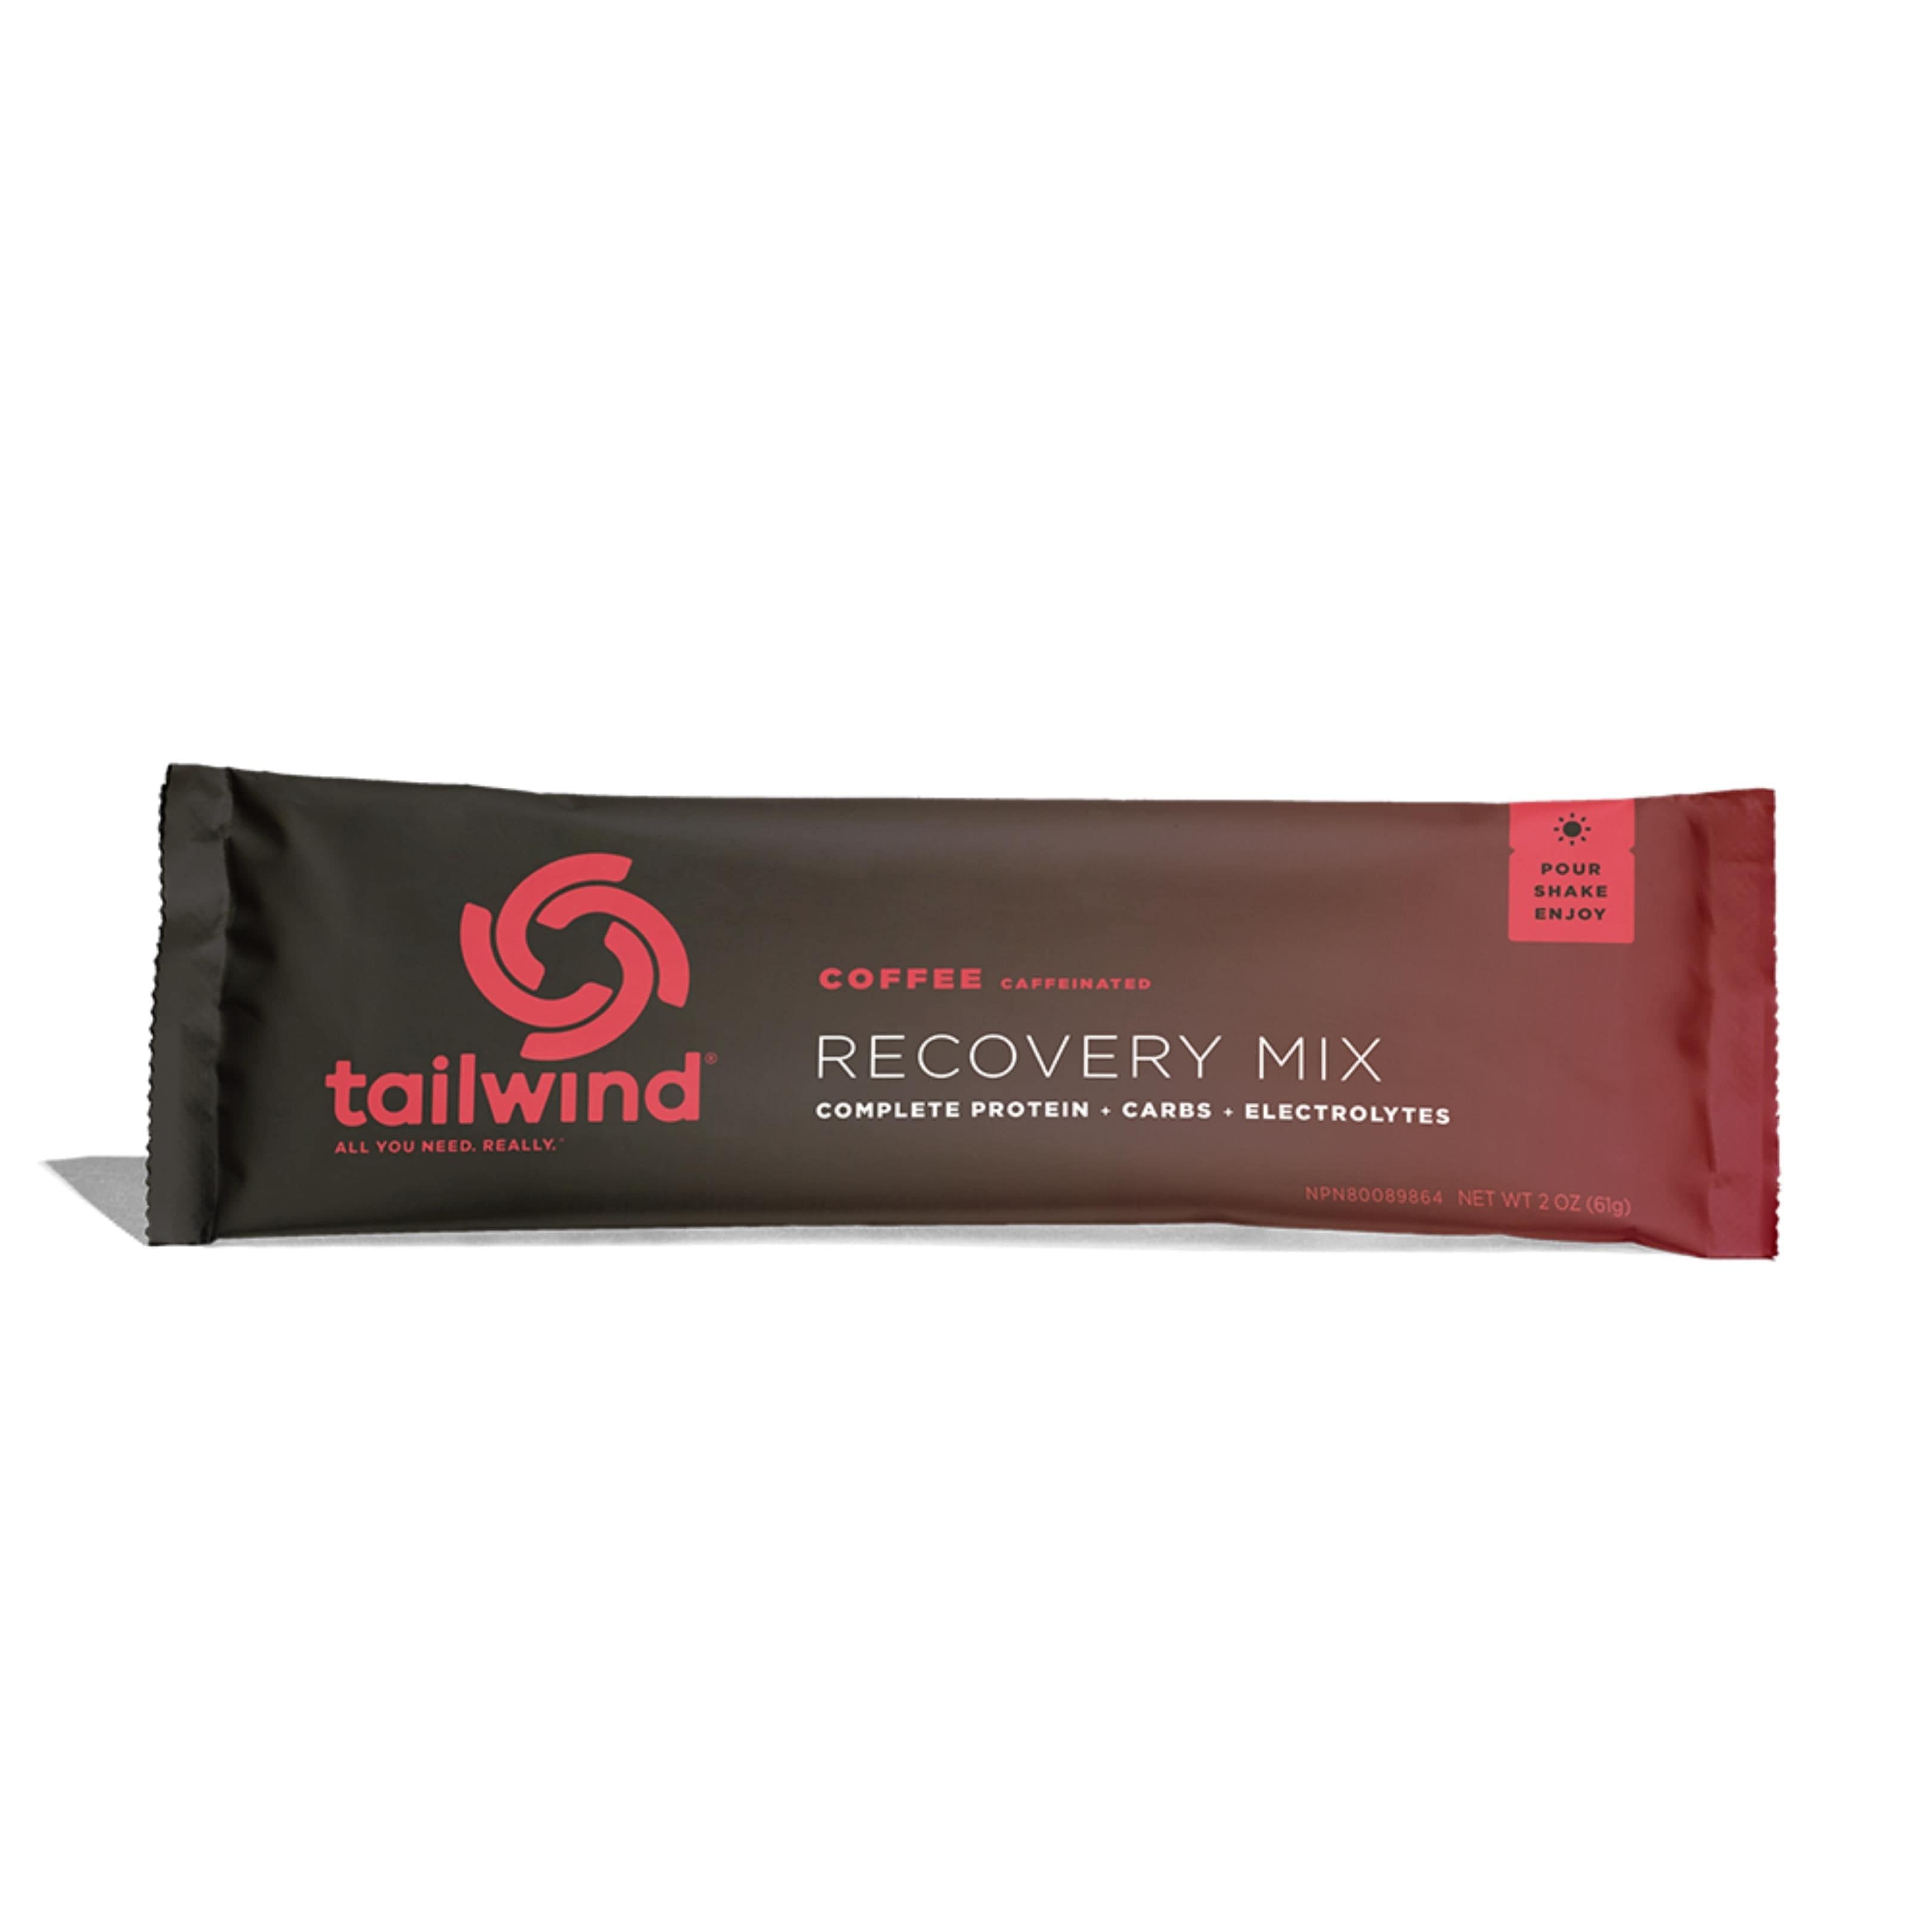 tailwind Nutrition Supplement Stick (2 serve) / Coffee Rebuild Recovery Drink Mix 8 55283 00579 8